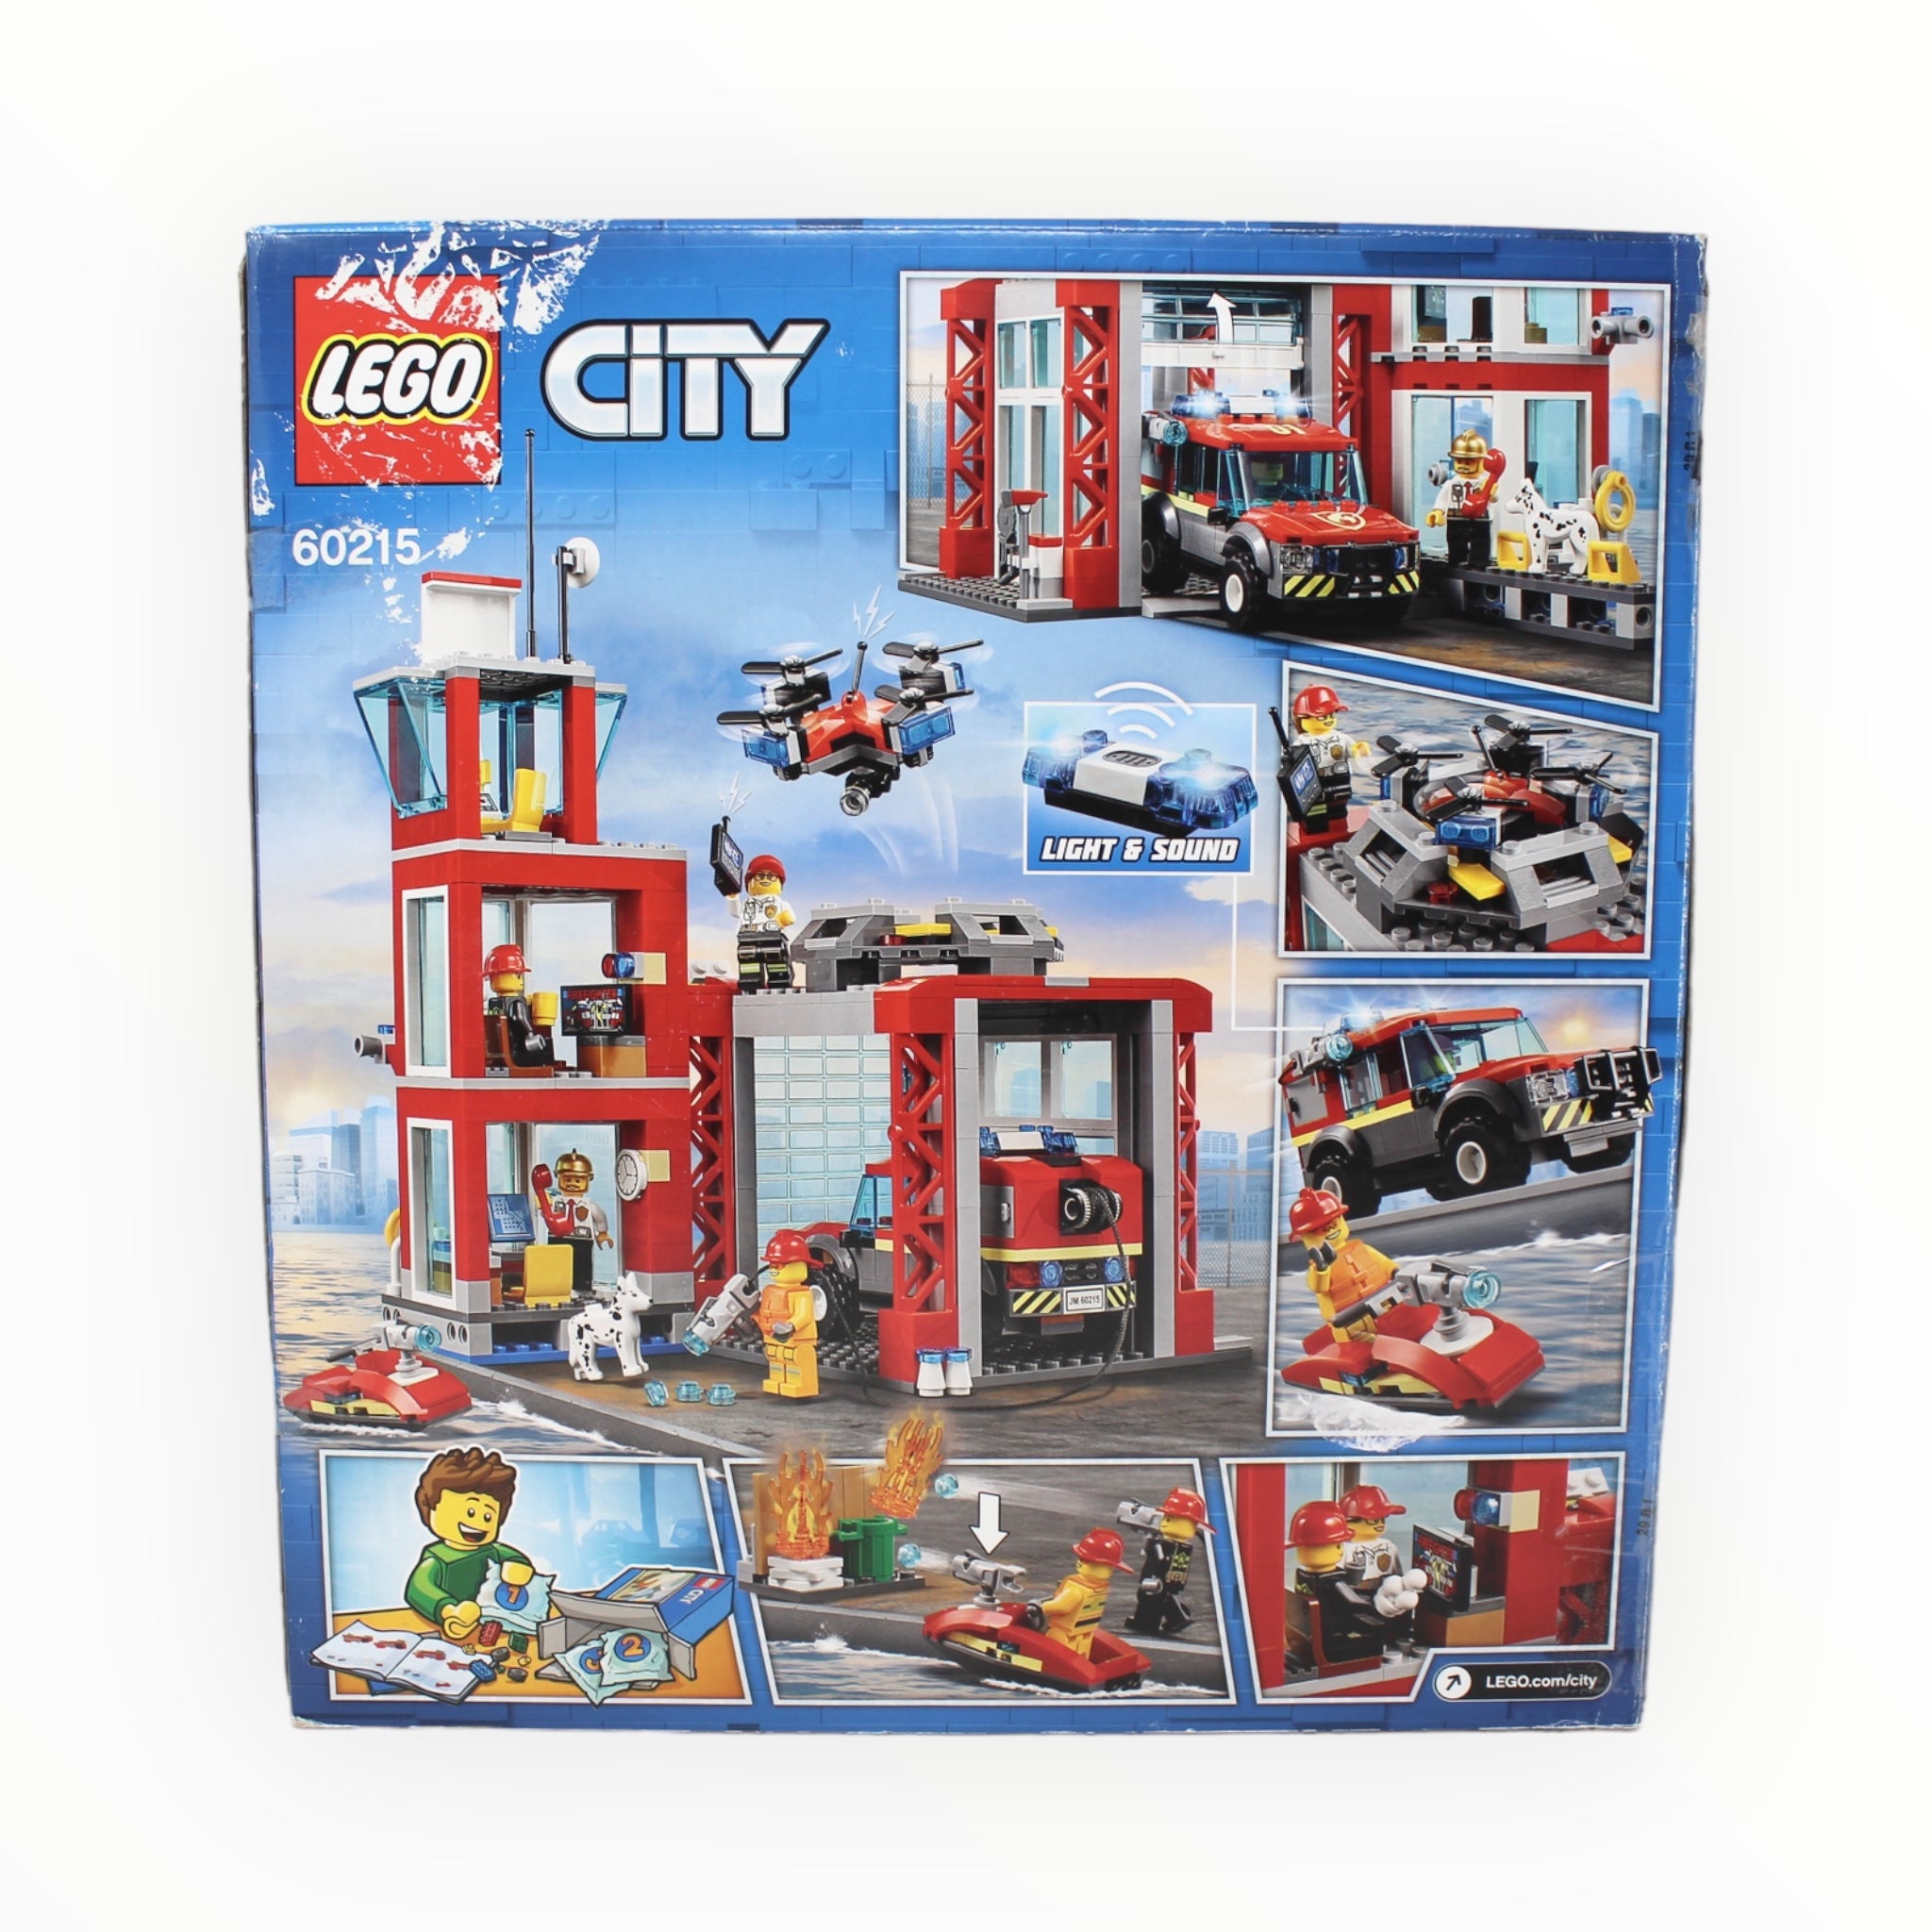 Certified Used Set 60215 City Fire Station (open box, sealed bags)